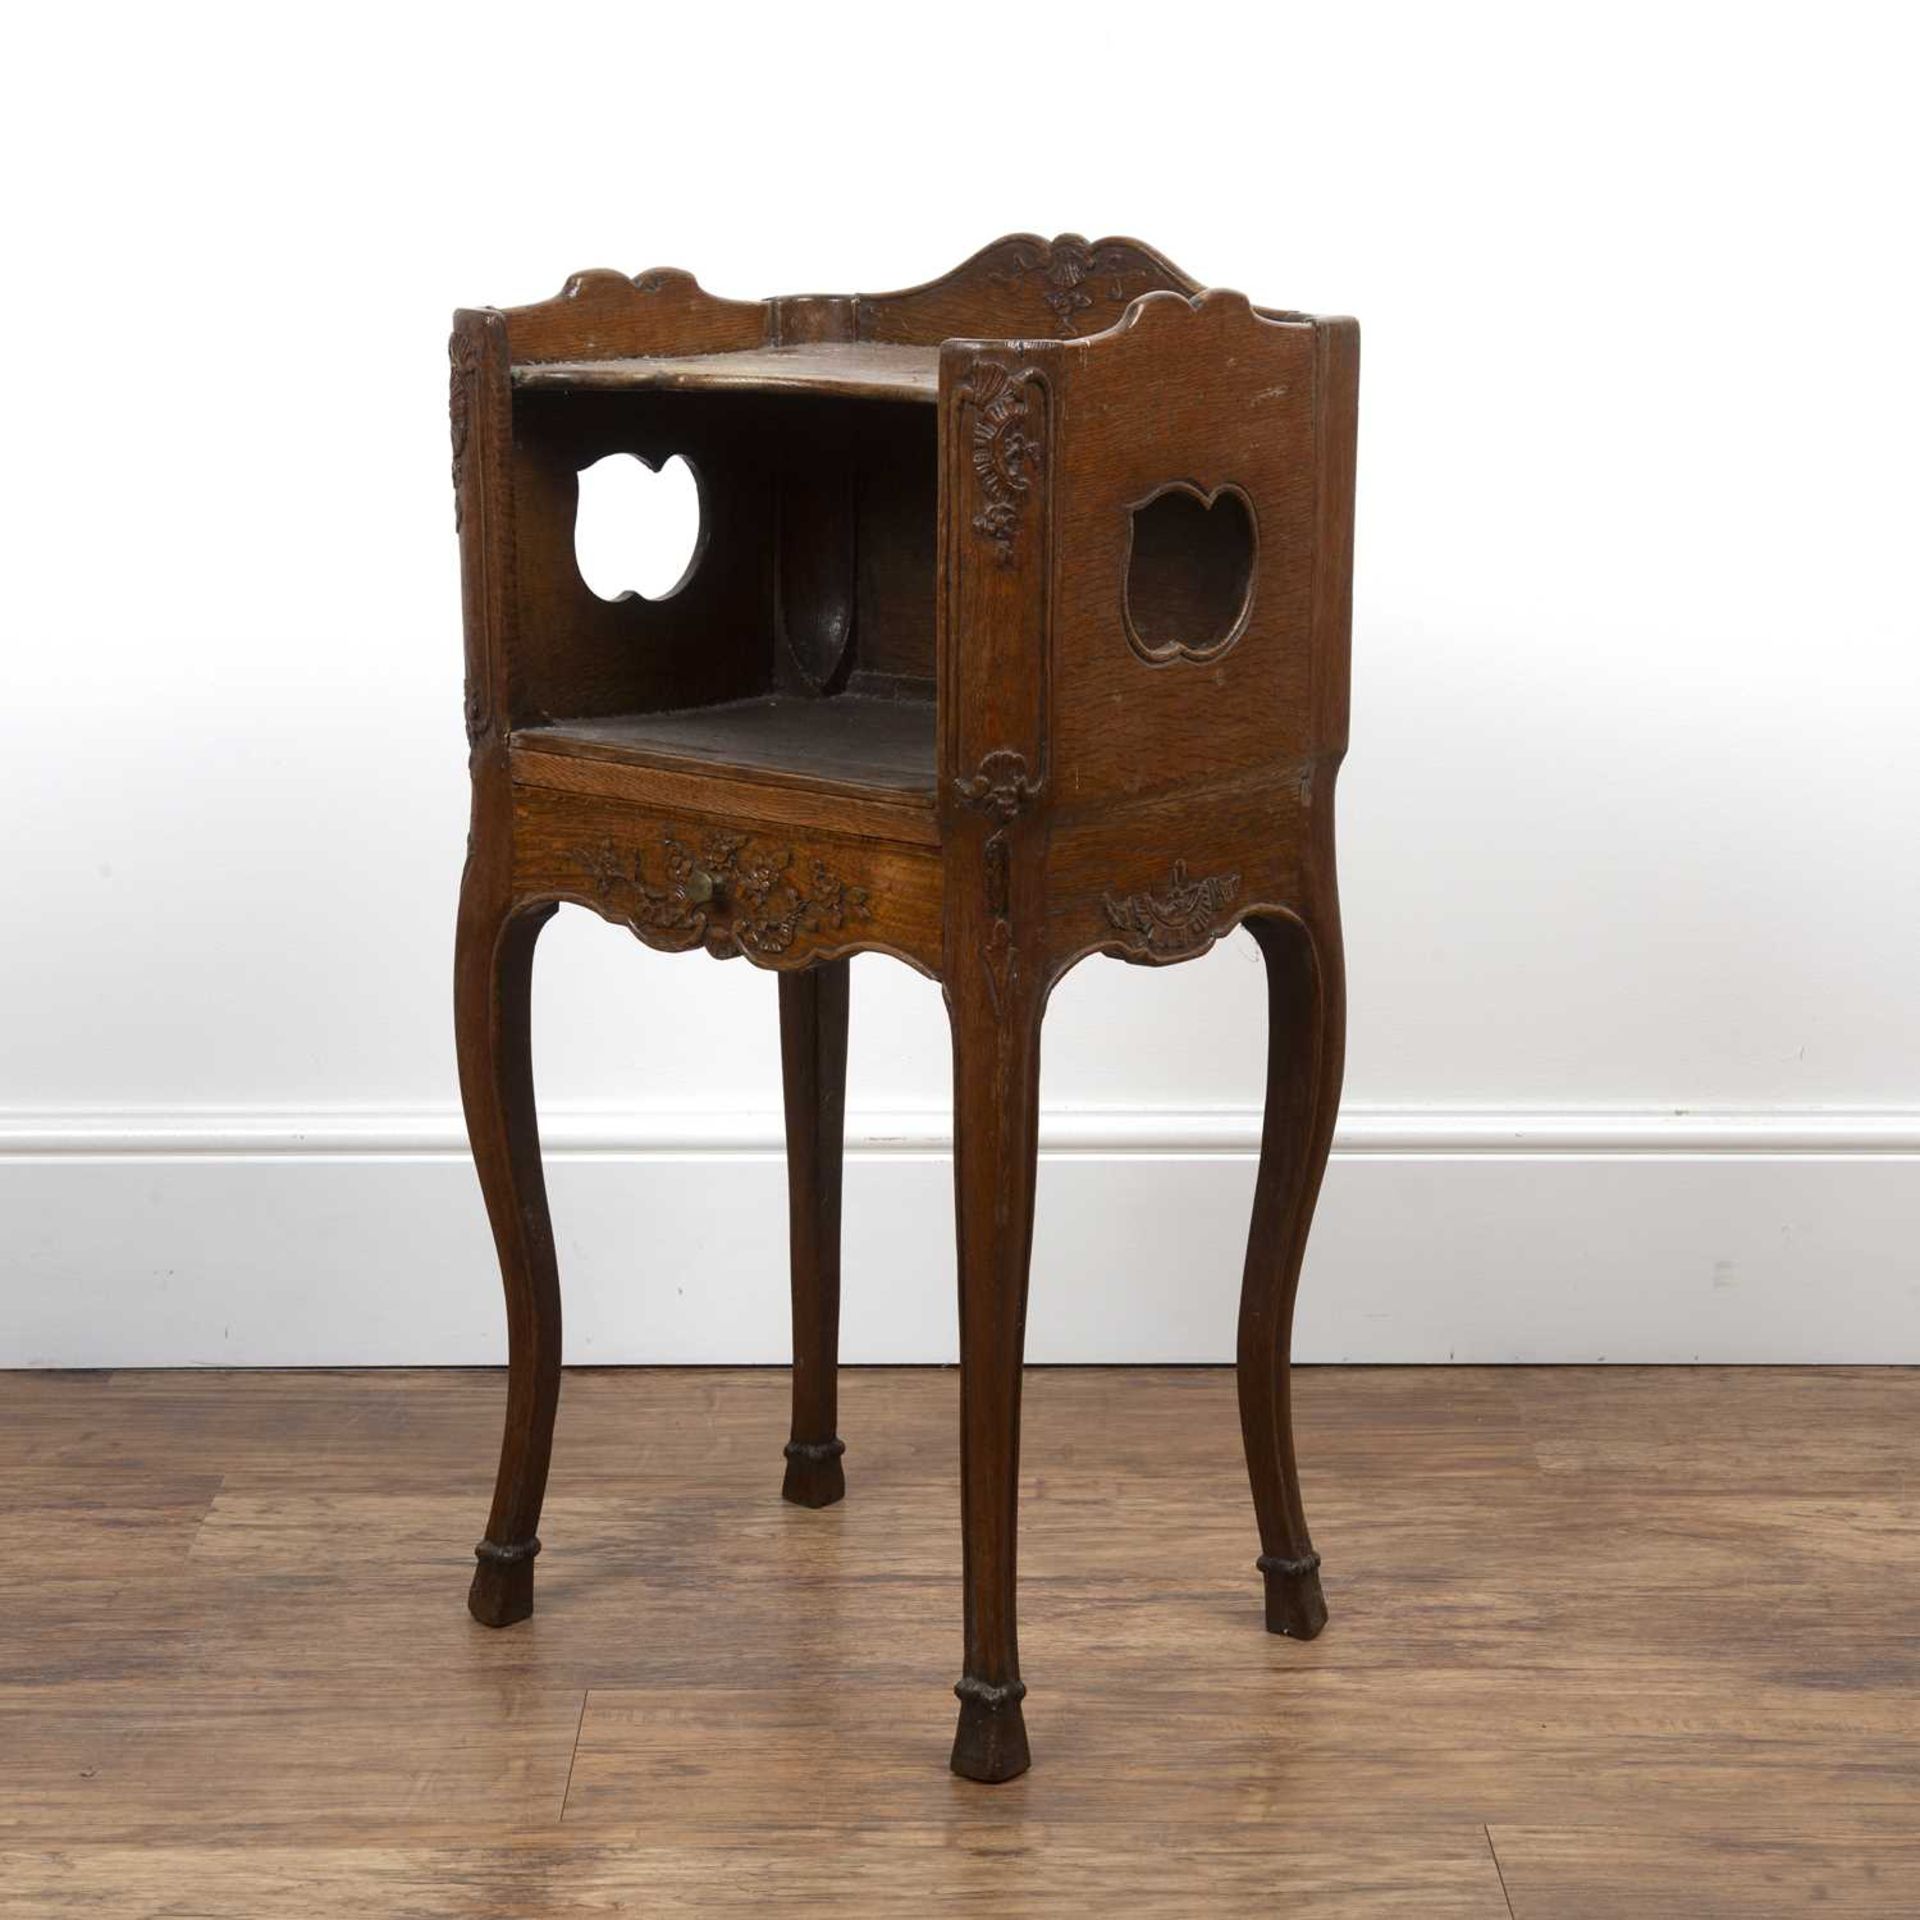 Oak bedside table or side table French Provincial, 19th Century, with shaped galleried top, - Image 3 of 6